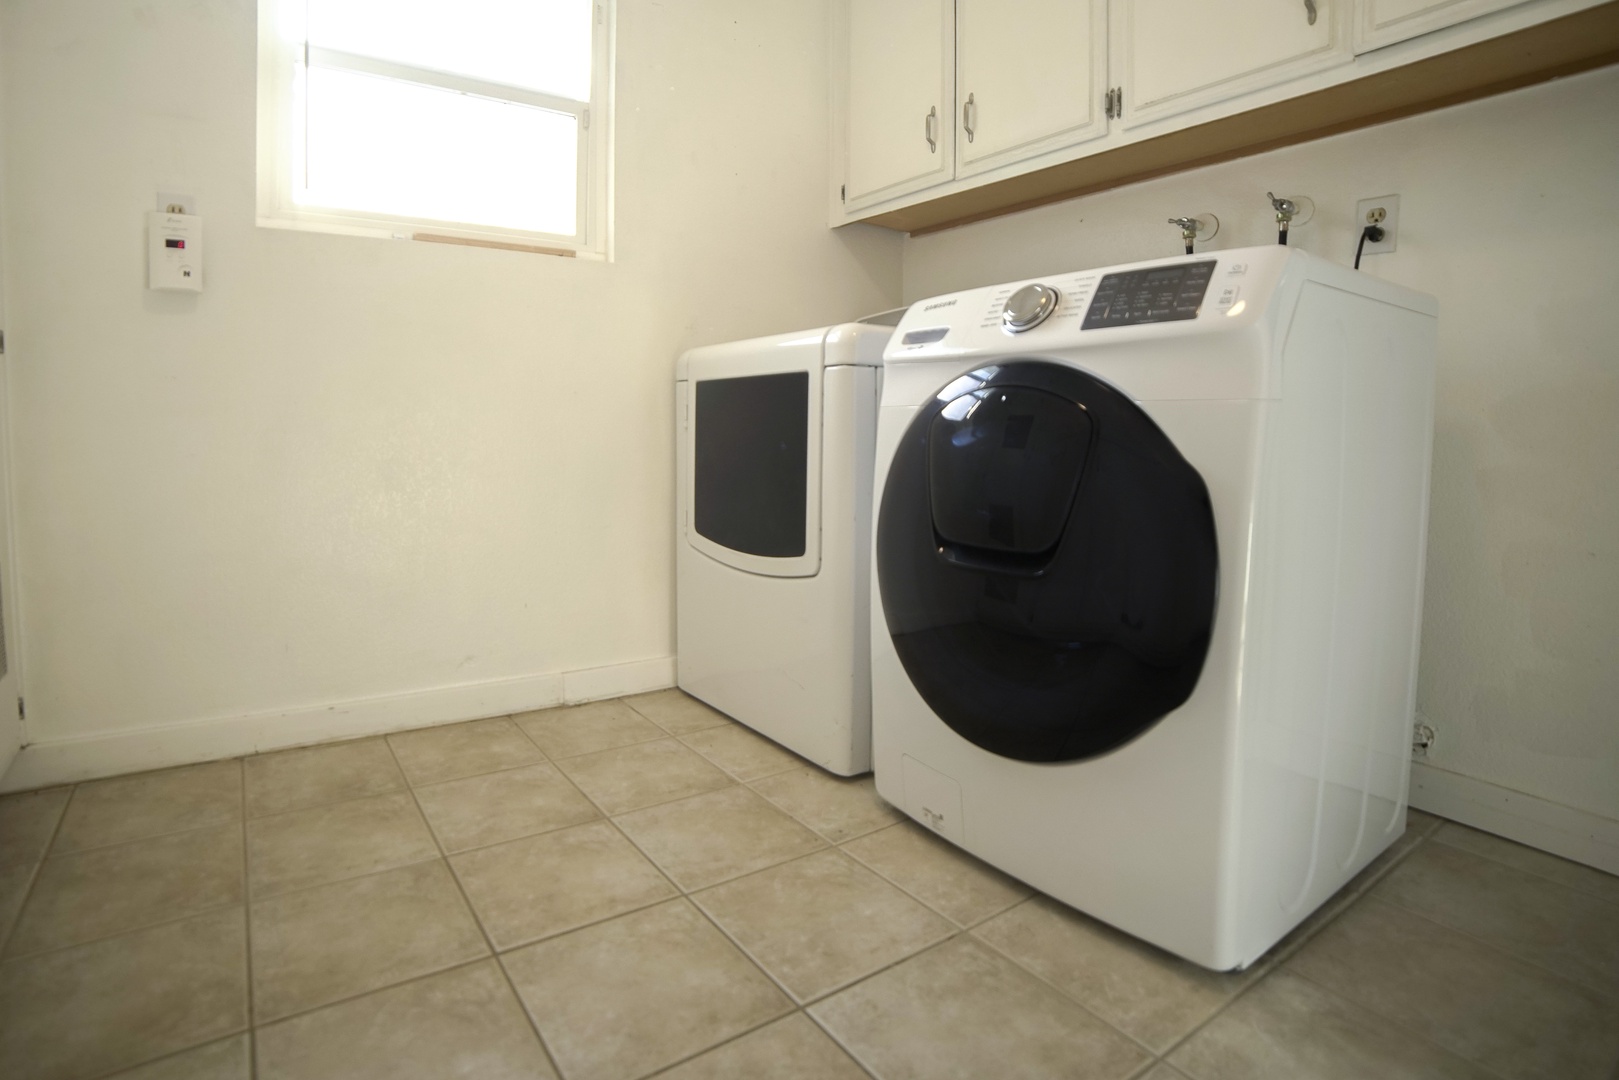 Washer area